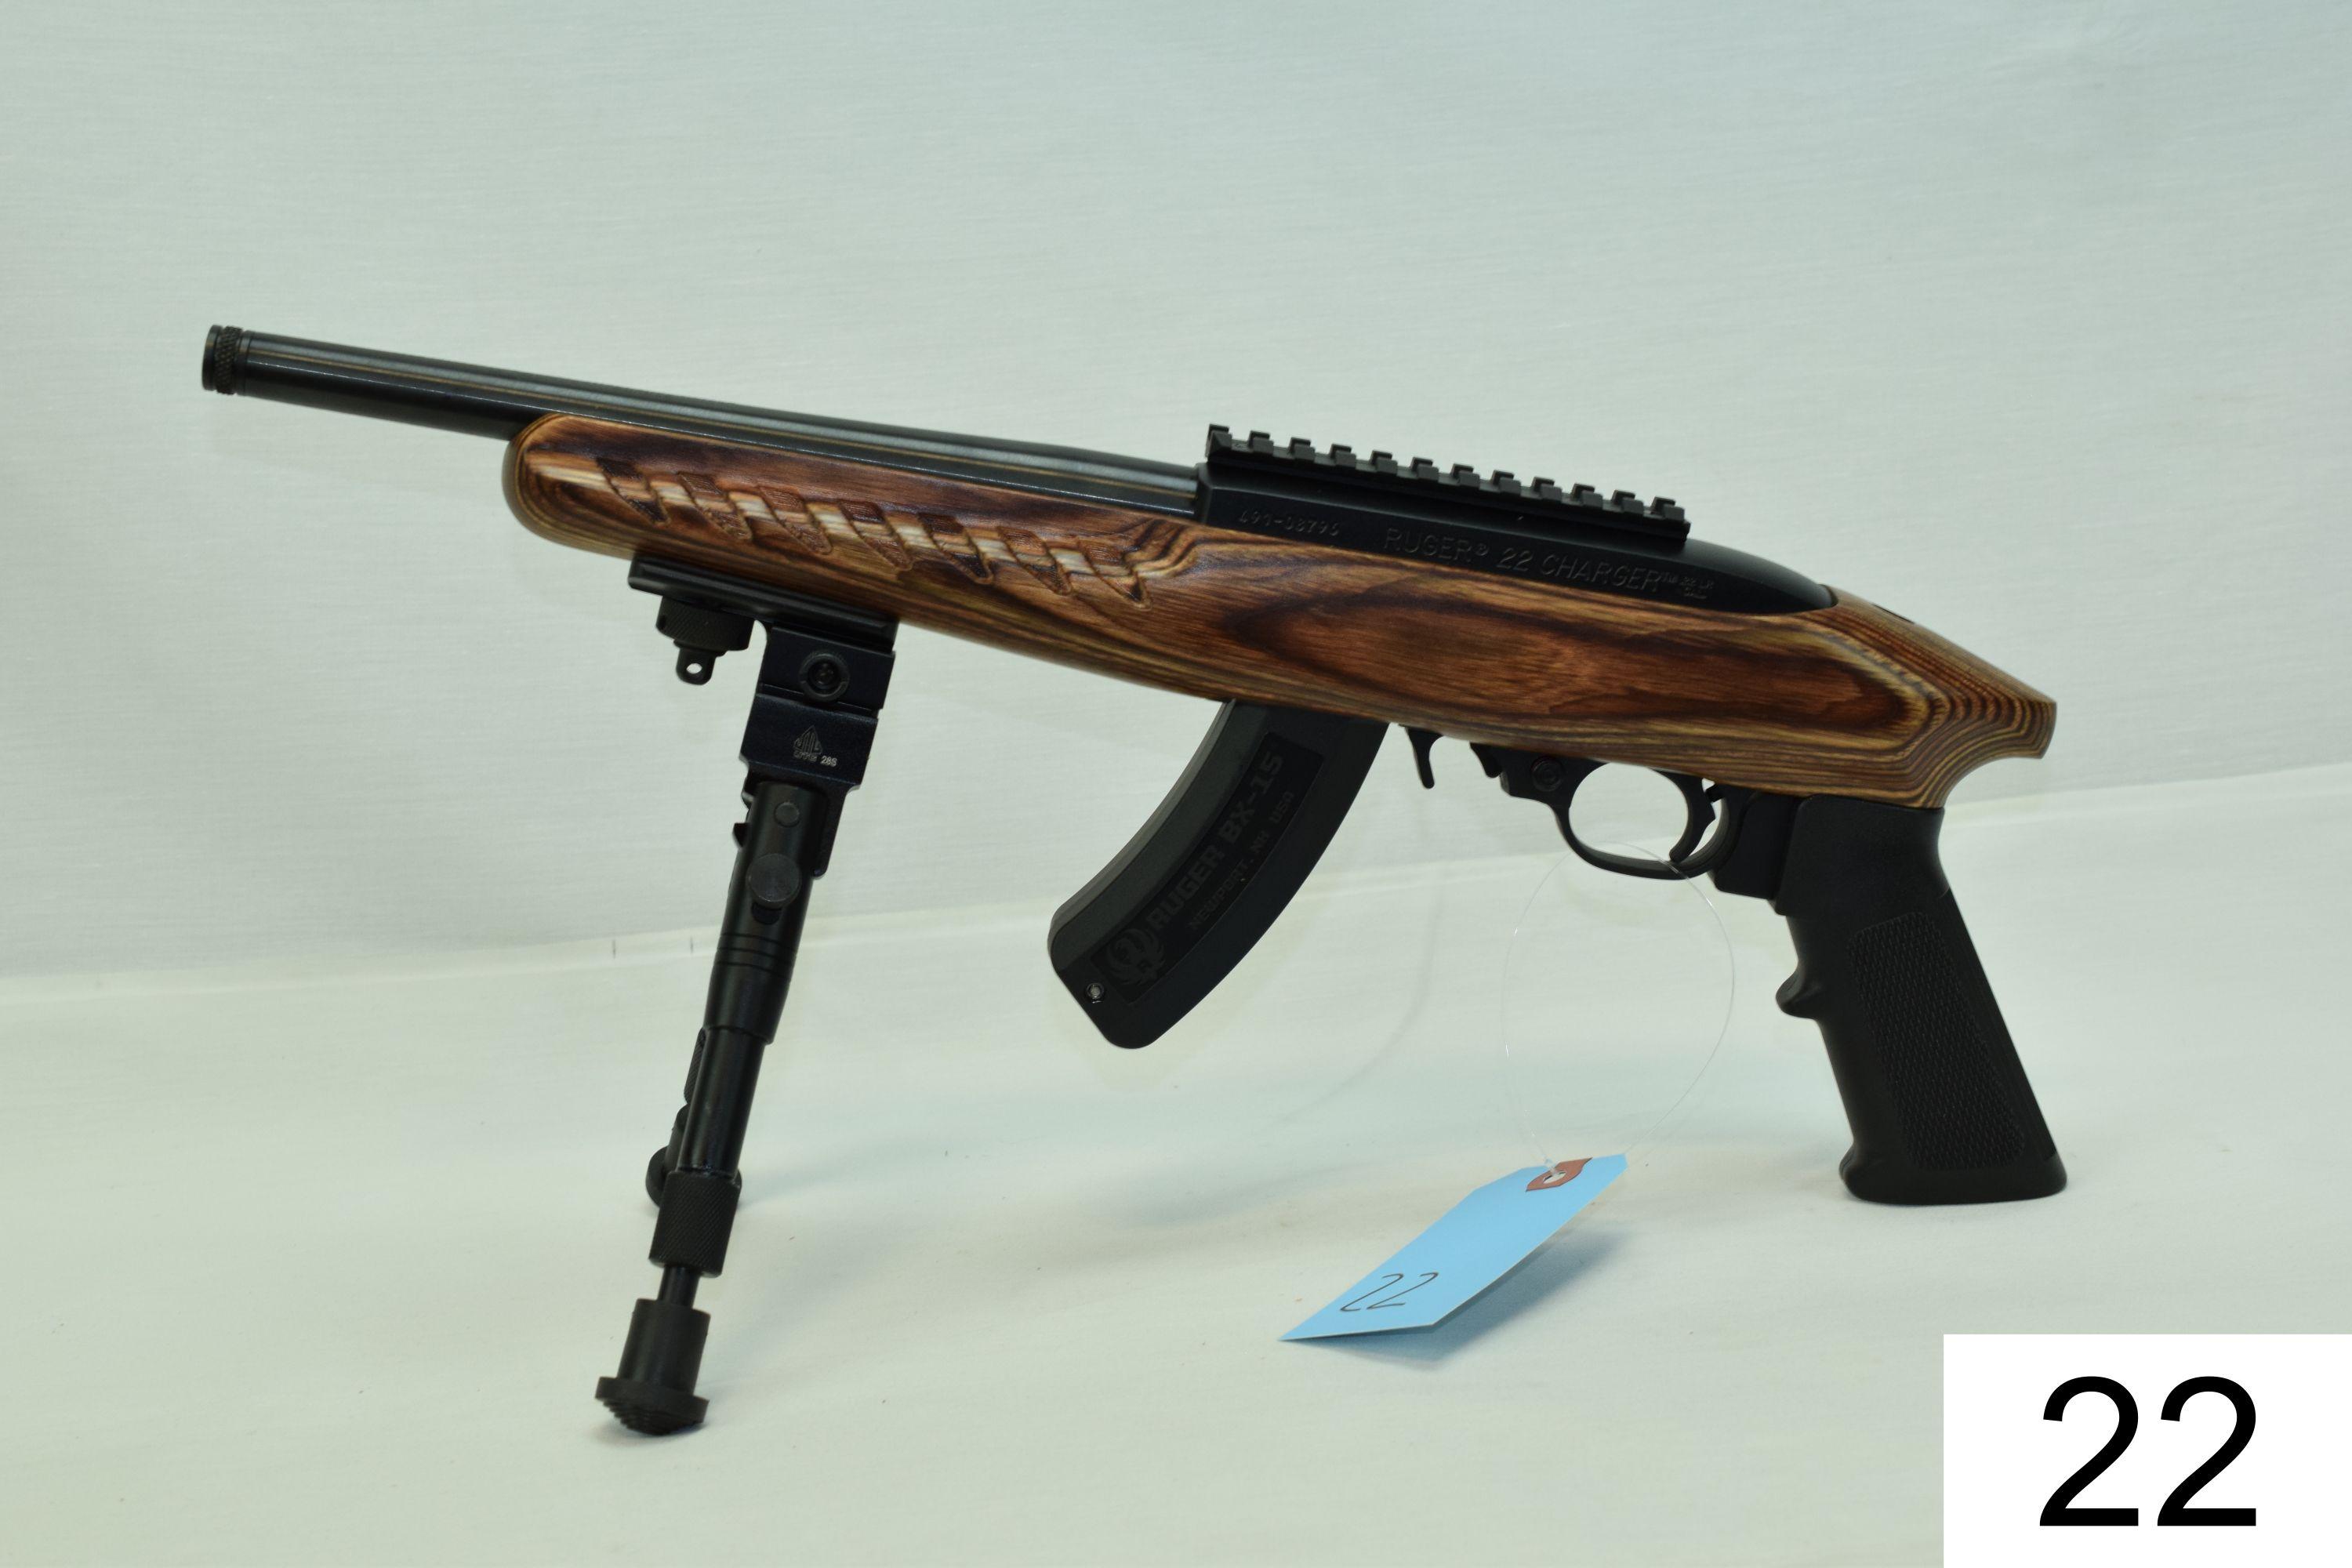 Ruger    Charger    Cal .22 LR    SN: 49108796    W/Bipod    Condition: Like New in Softcase